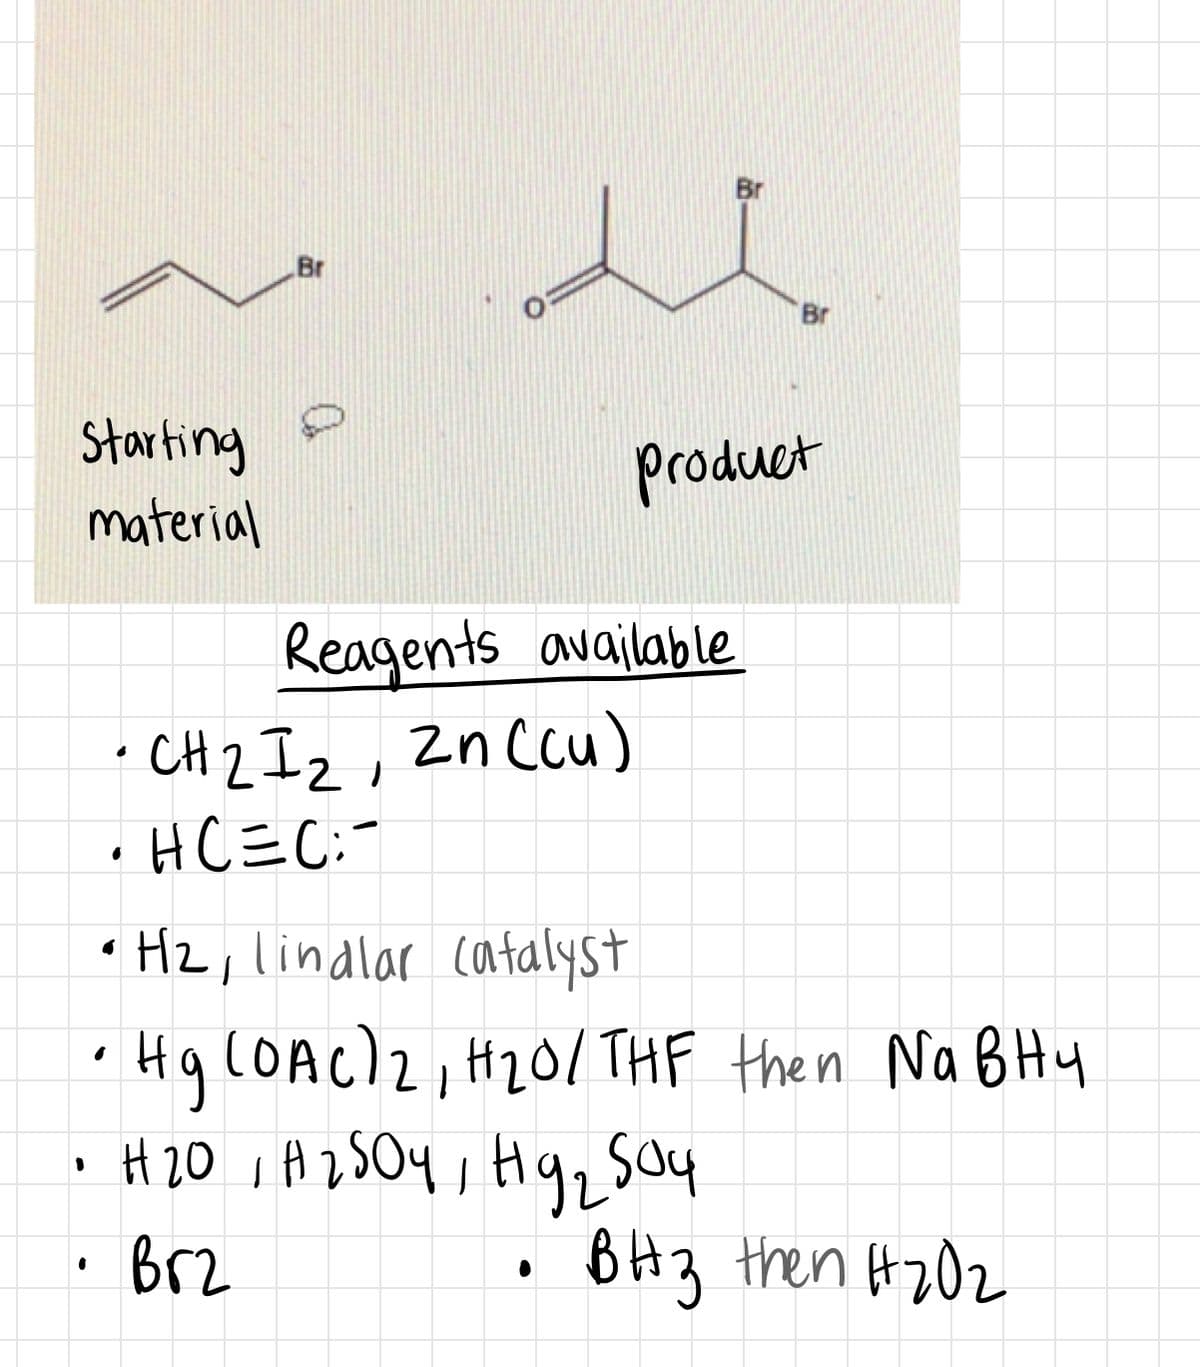 Br
Br
Br
Starting
material
product
Reagents available
• CH 2 Iz, Zn Ccu)
•HC=C:-
• Hz, lindlar catalyst
Hq COAC)2, H20/THF then Na BHy
Brz
BH3 then H20z
